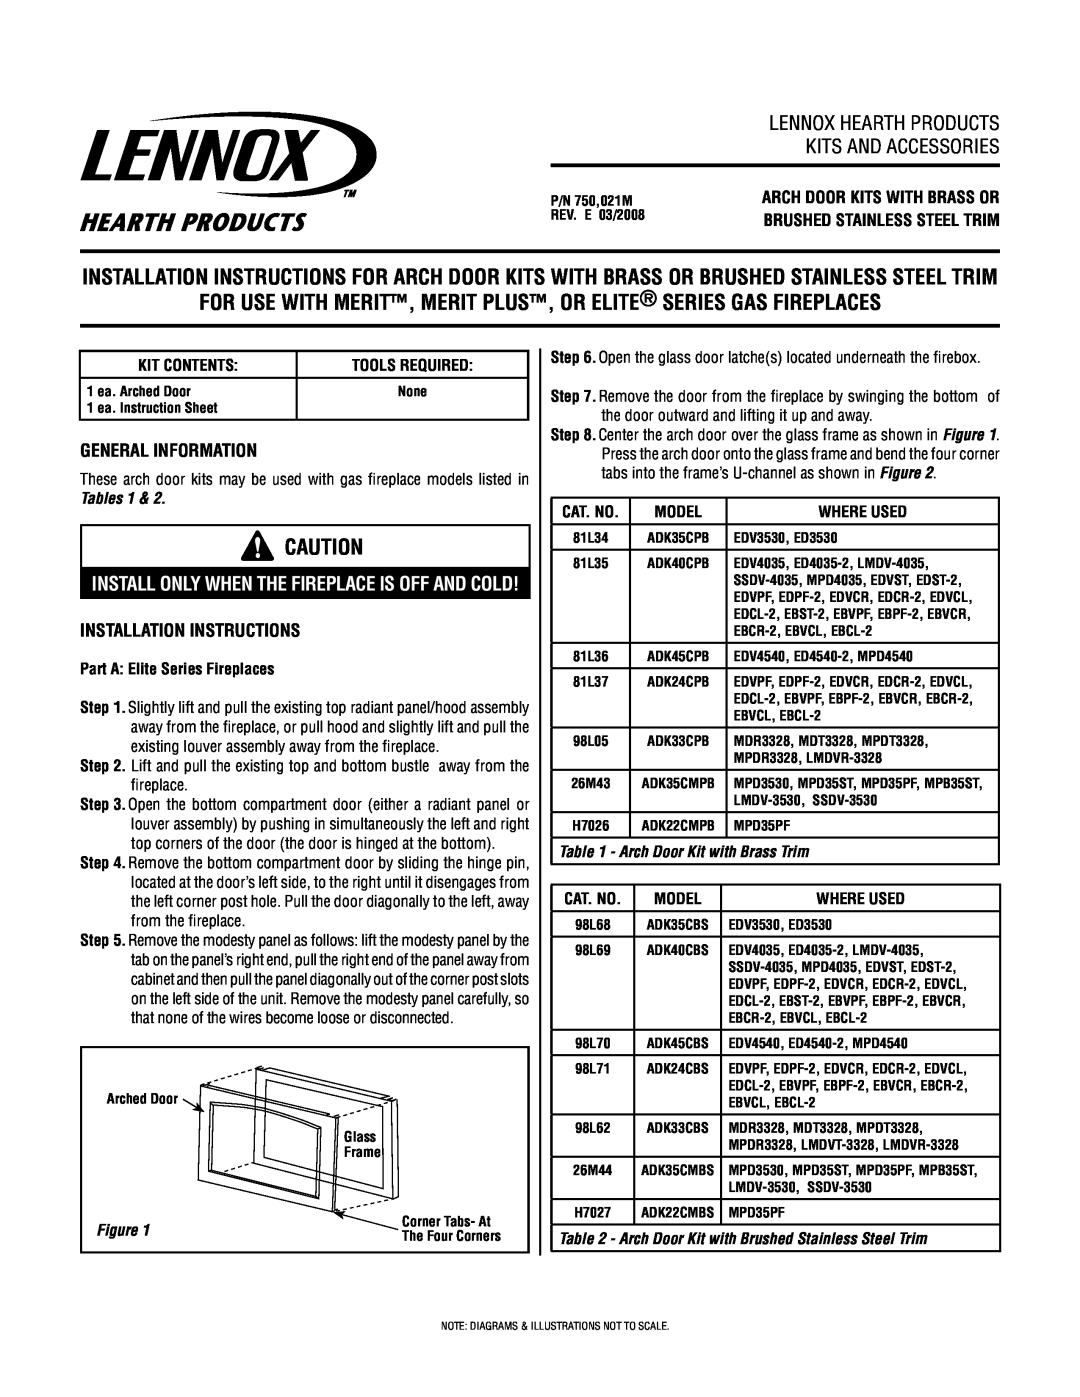 Lennox Hearth ADK40CPB, ADK45CBS installation instructions Tables, Arch Door Kit with Brass Trim, Kits And Accessories 